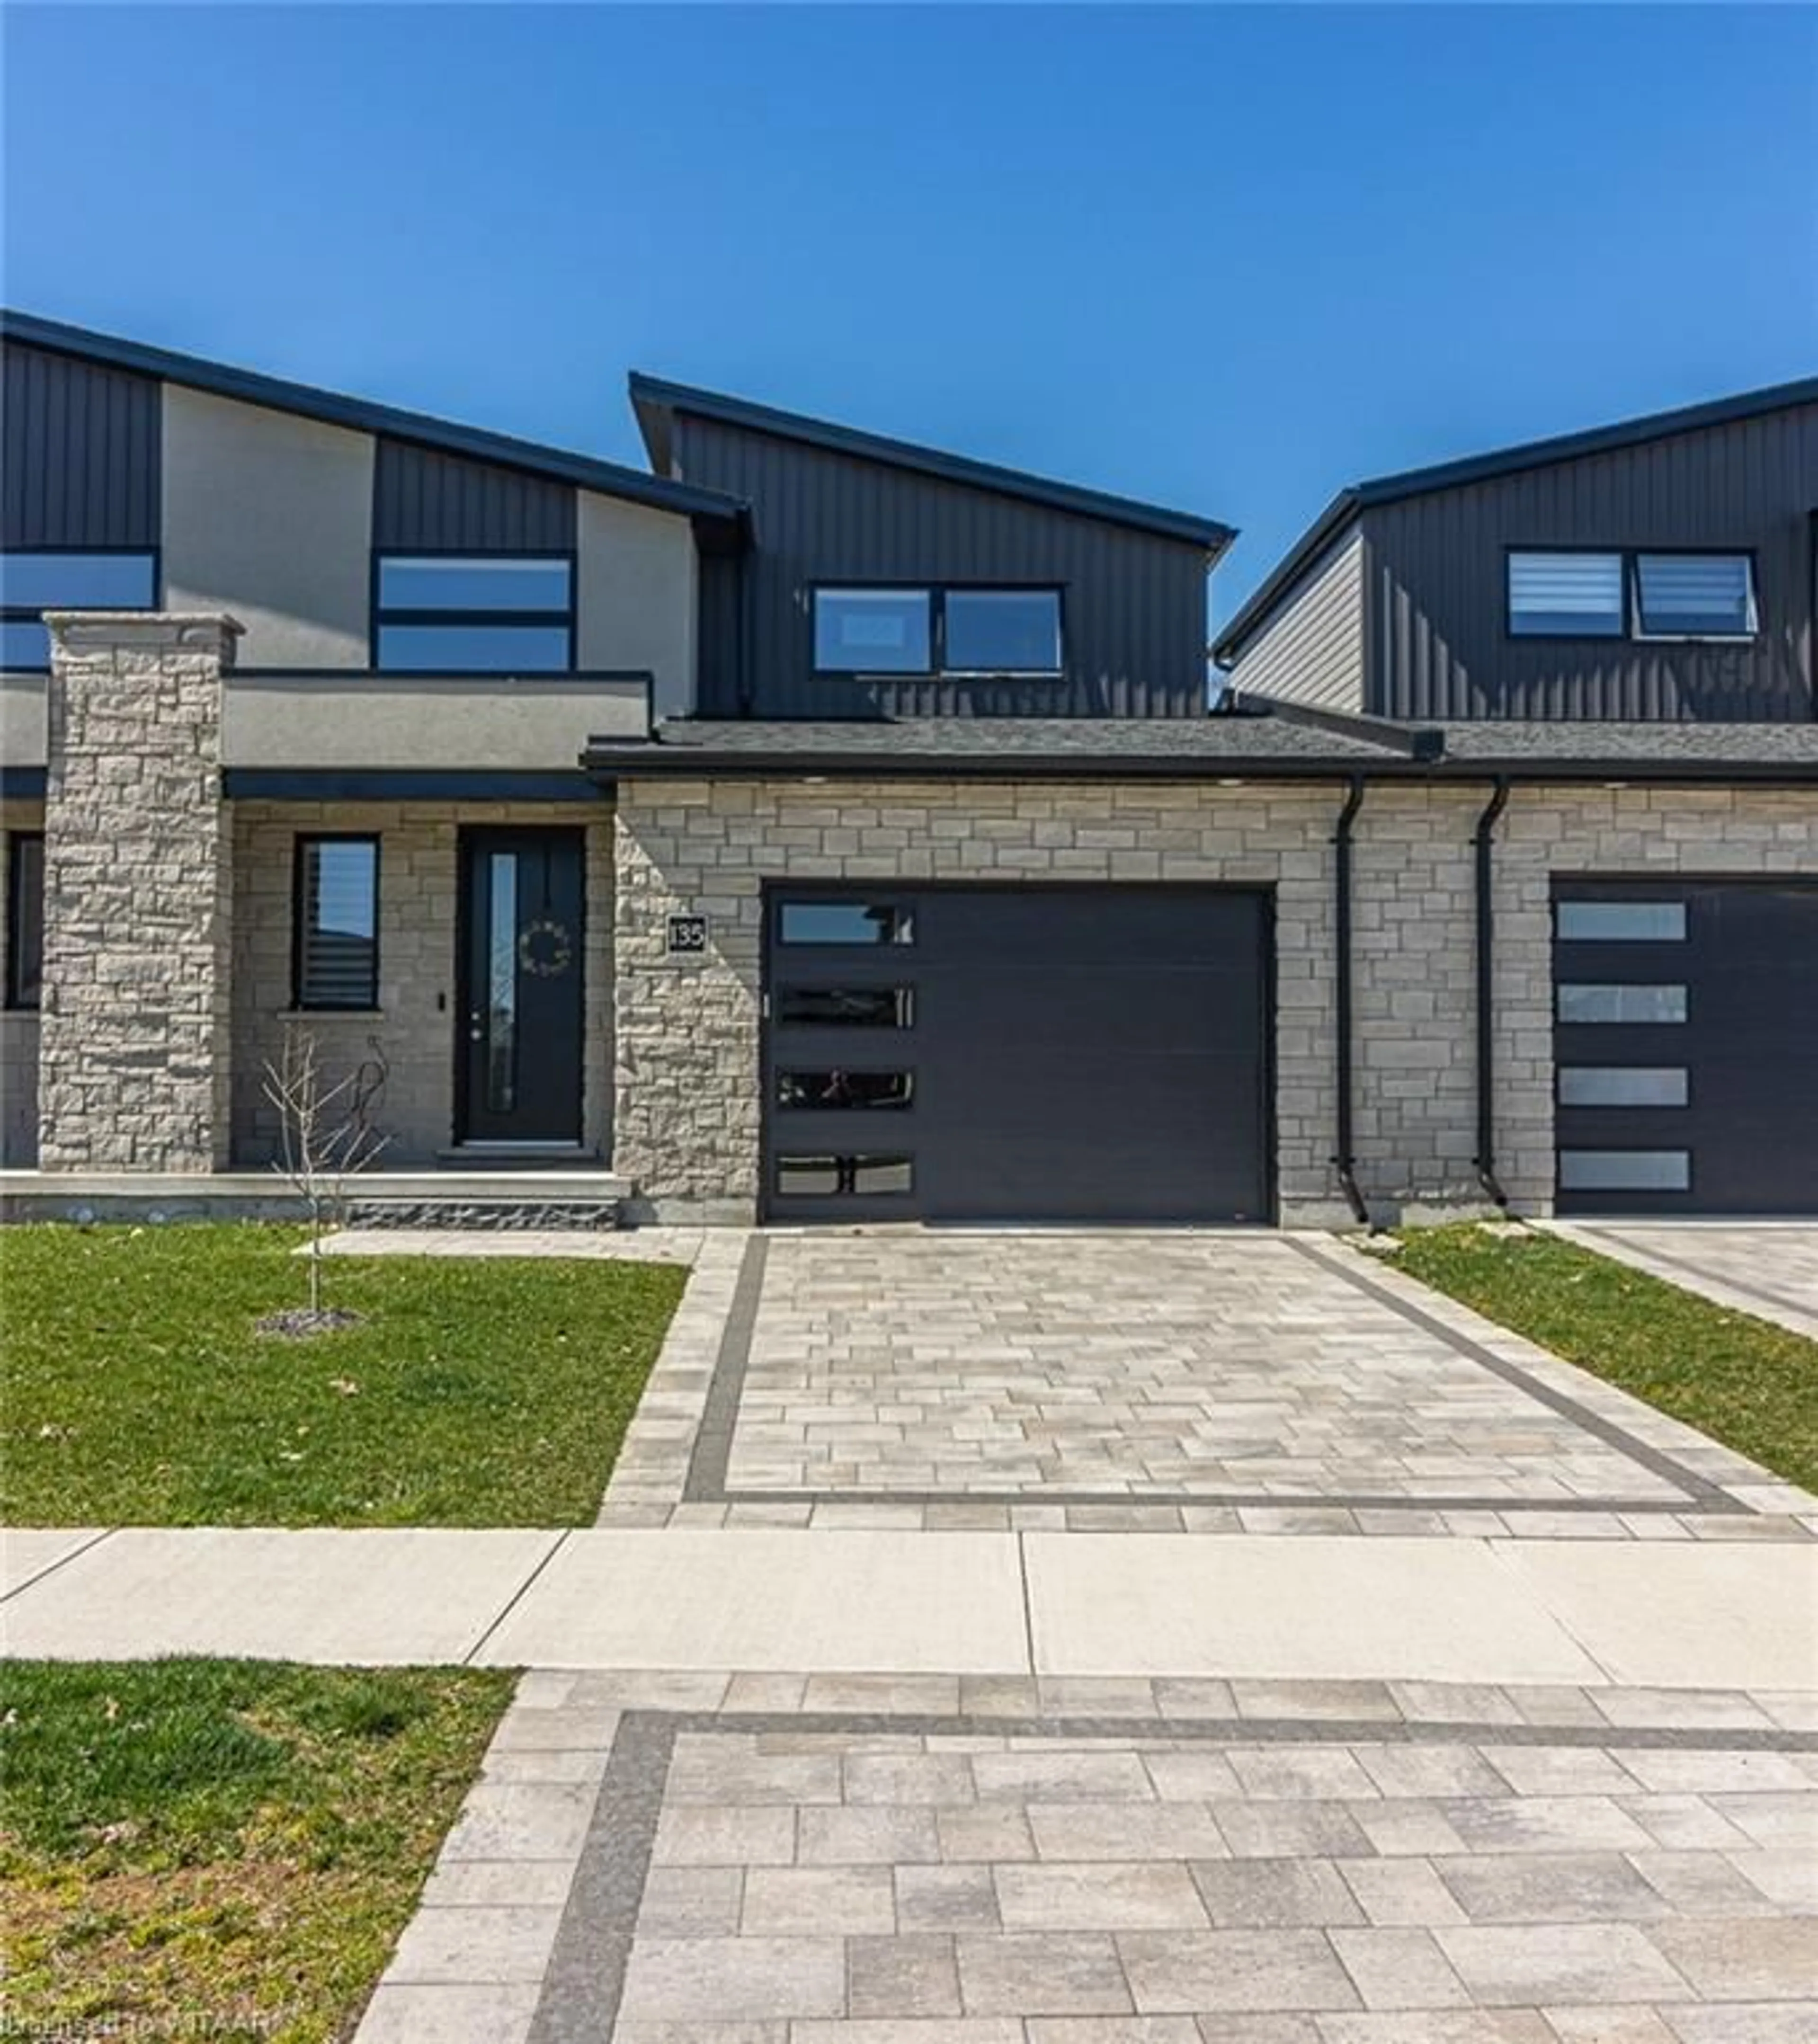 Home with brick exterior material for 135 Tamarack Blvd, Woodstock Ontario N4S 0E2